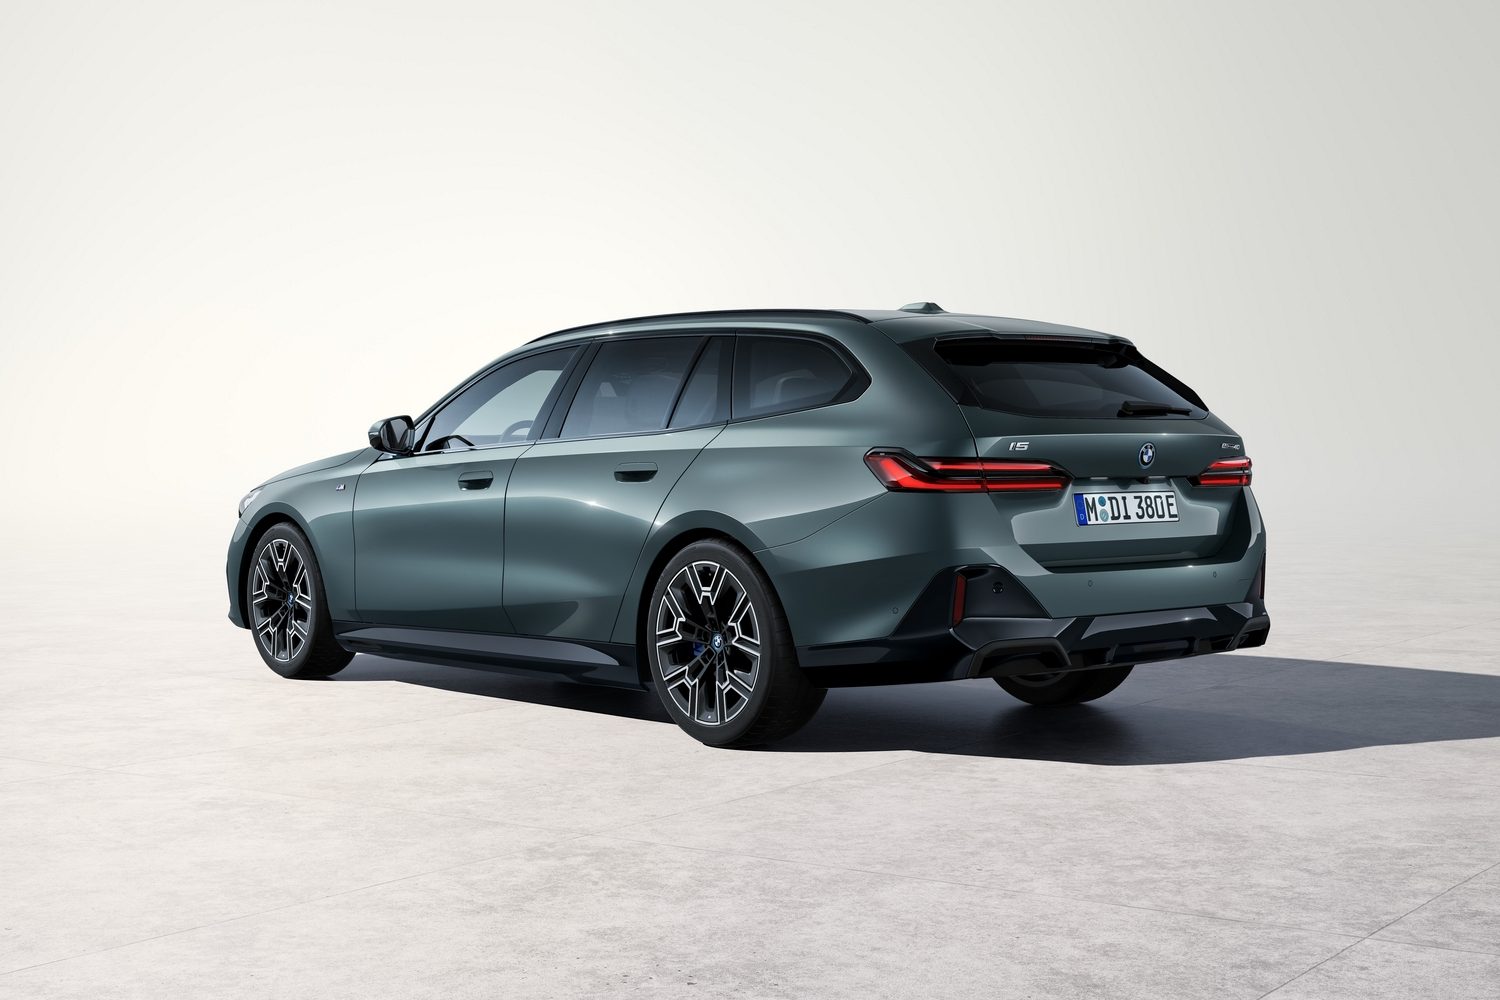 BMW shows off new 5 Series Touring